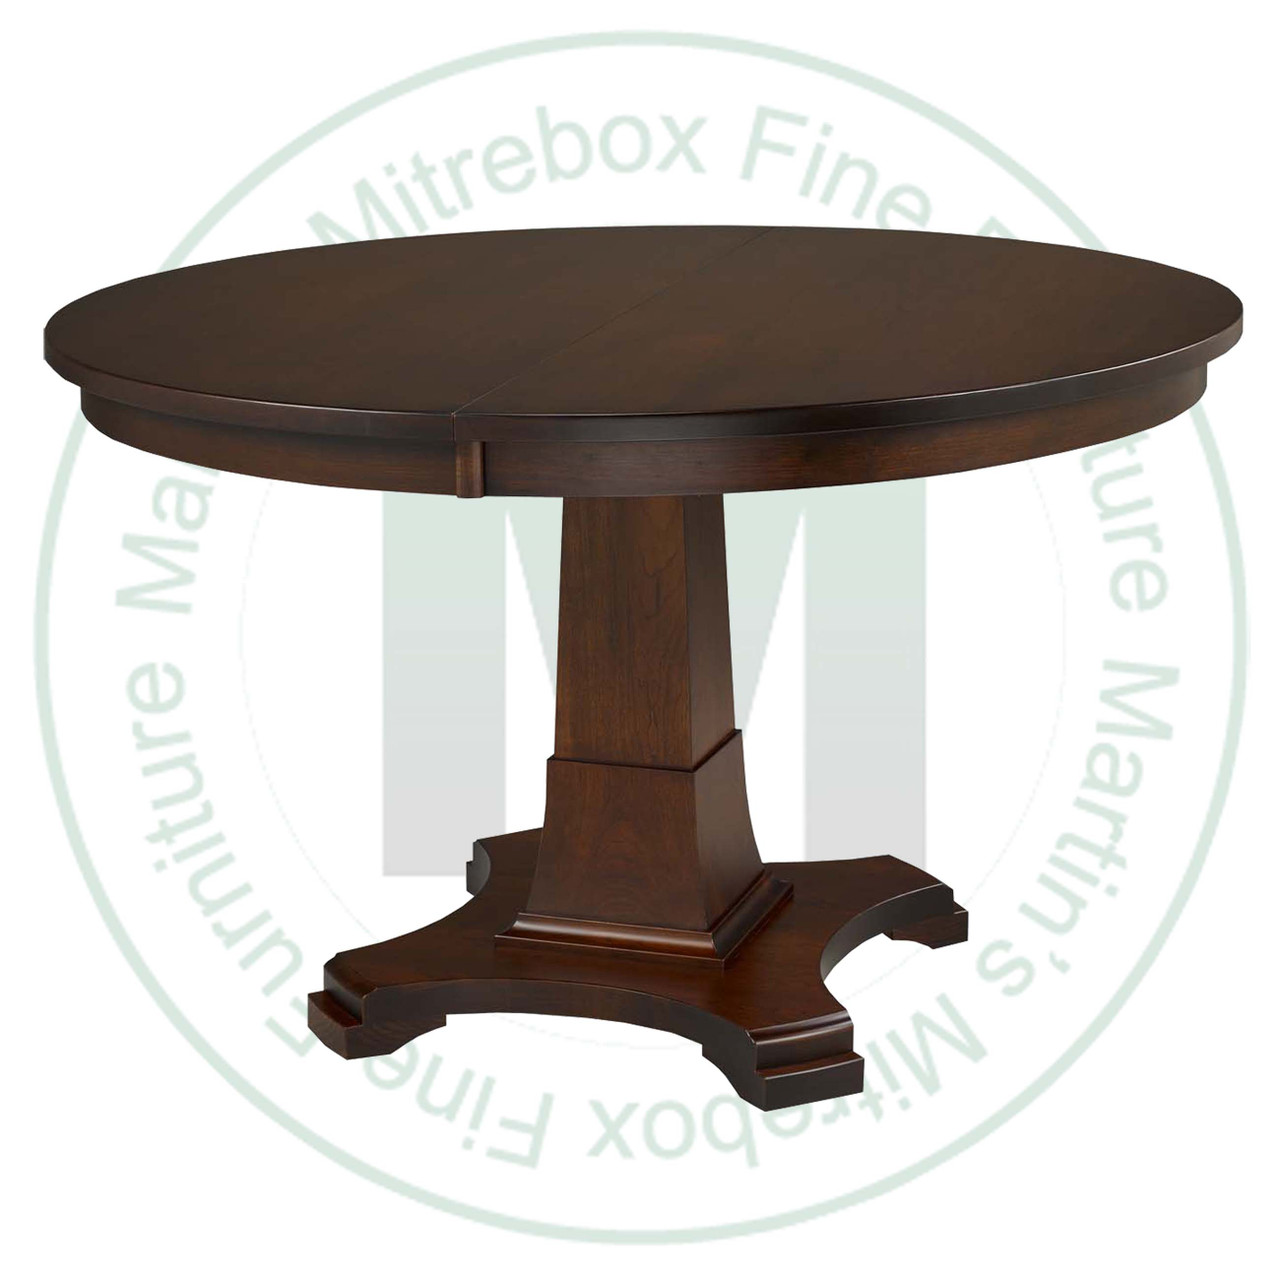 Wormy Maple Abbey Single Pedestal Table 54''D x 54''W x 30''H Round Solid Table. Table Has 1'' Thick Top